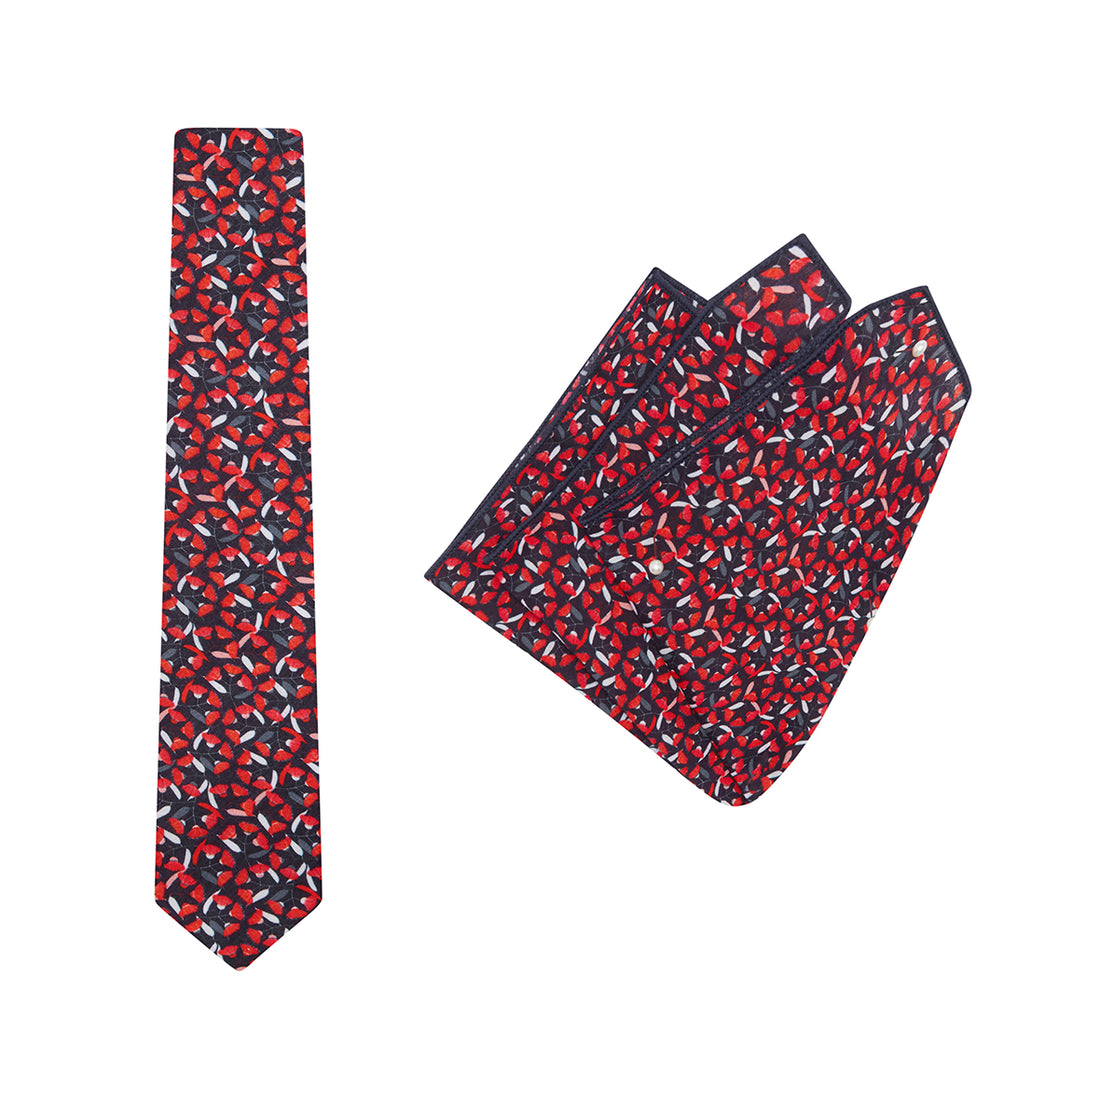 TIE + POCKET SQUARE SET. Jocelyn Proust Gum Blossom Print. Red/Navy. Supplied with matching pocket square.-Ties-PEROZ Accessories